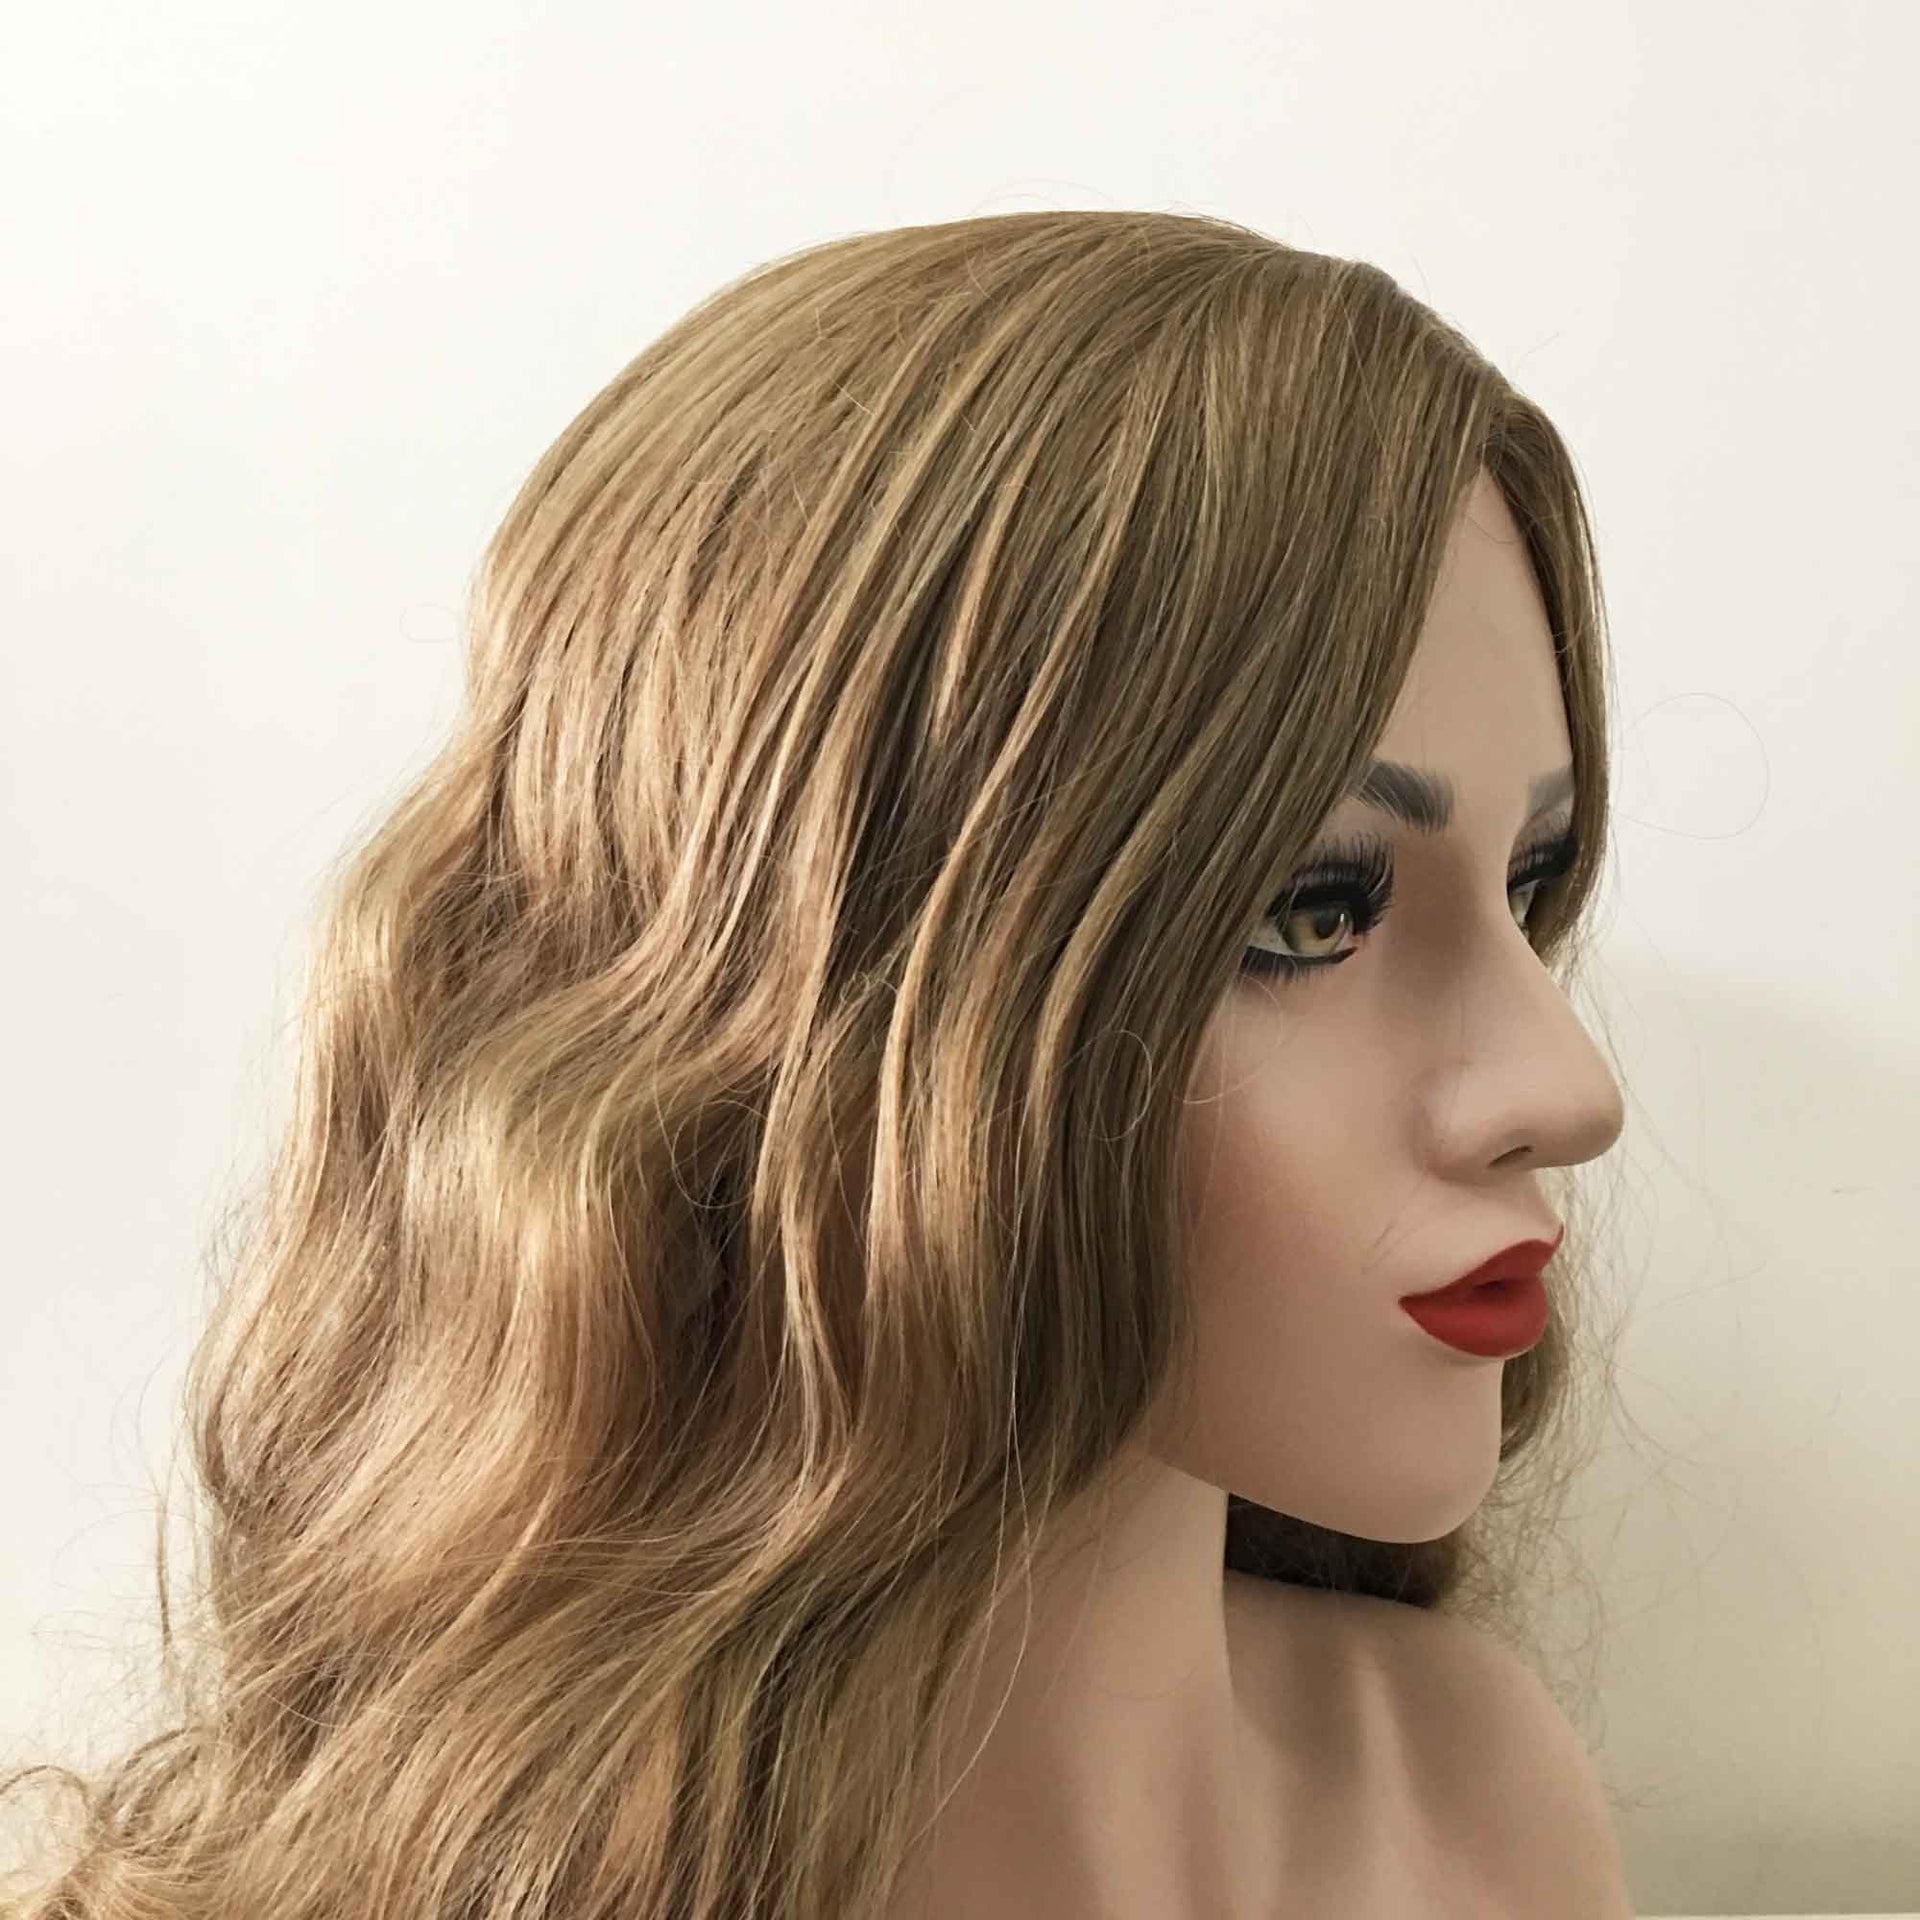 nevermindyrhead Women Light Brown Long Curly Frizzy Side Part Frizzy Wig